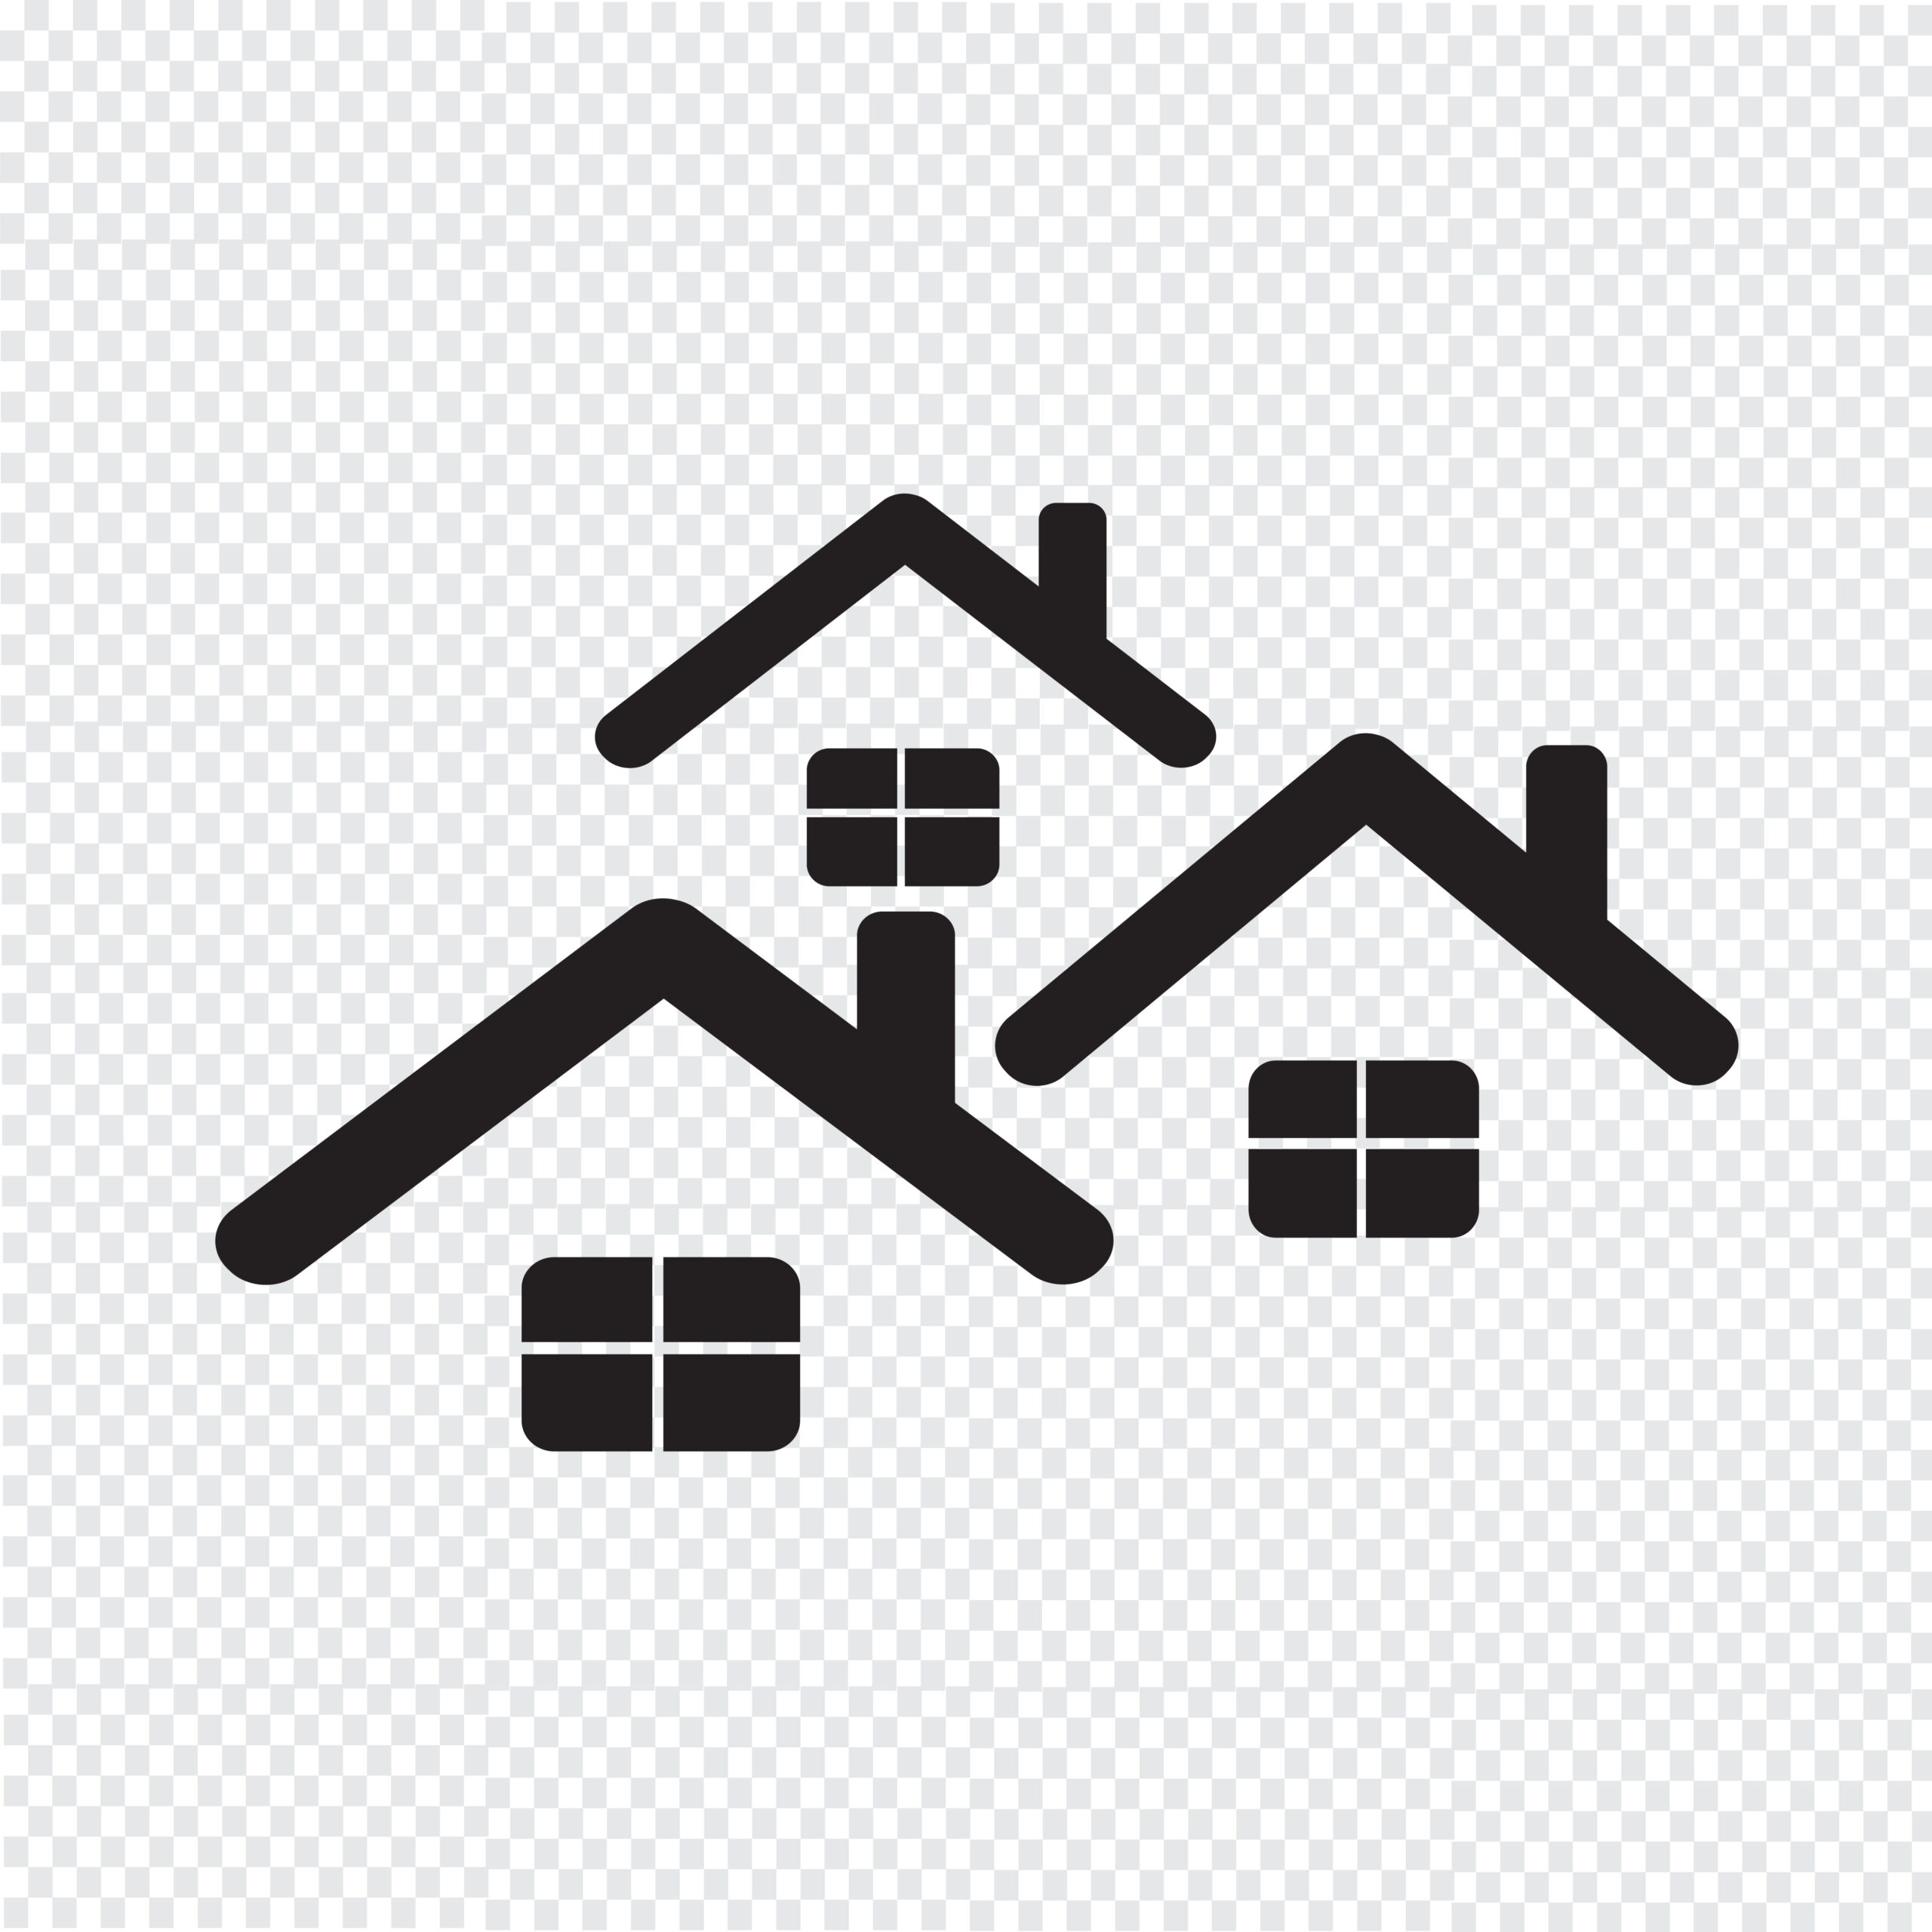 home icon symbol sign vector scaled